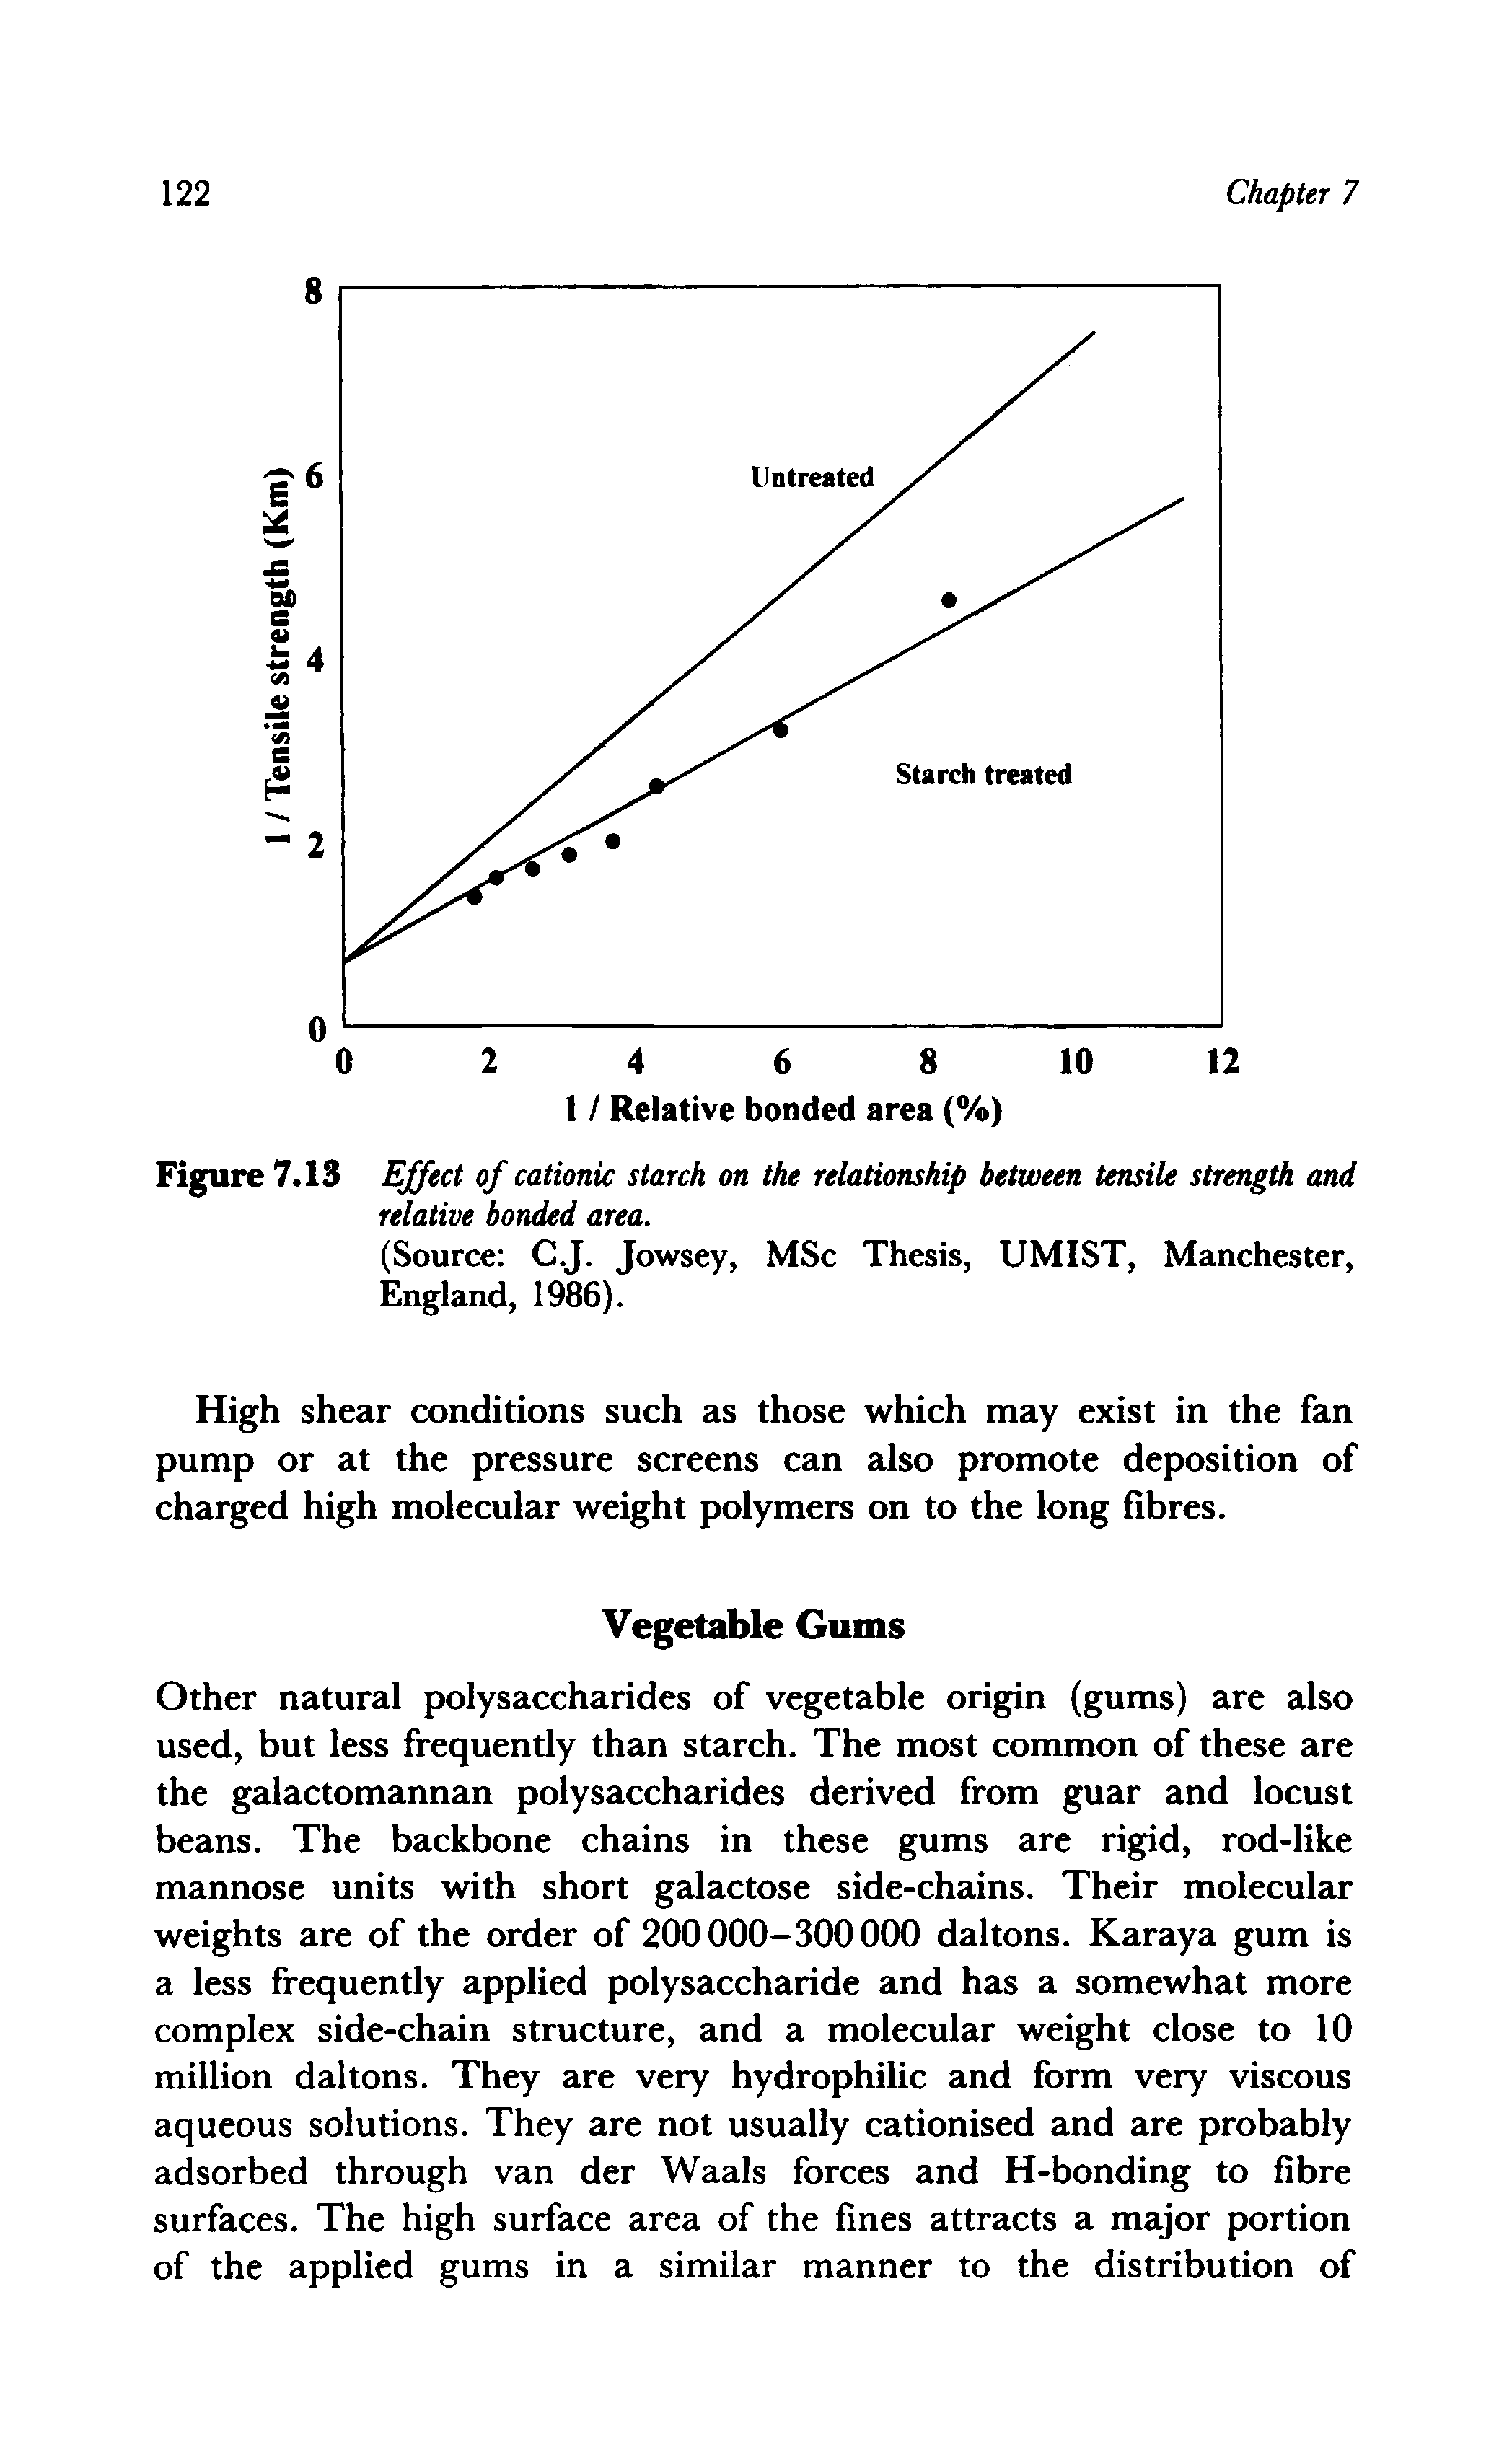 Figure 7.13 Effect of cationic starch on the relationship between tensile strength and relative bonded area.